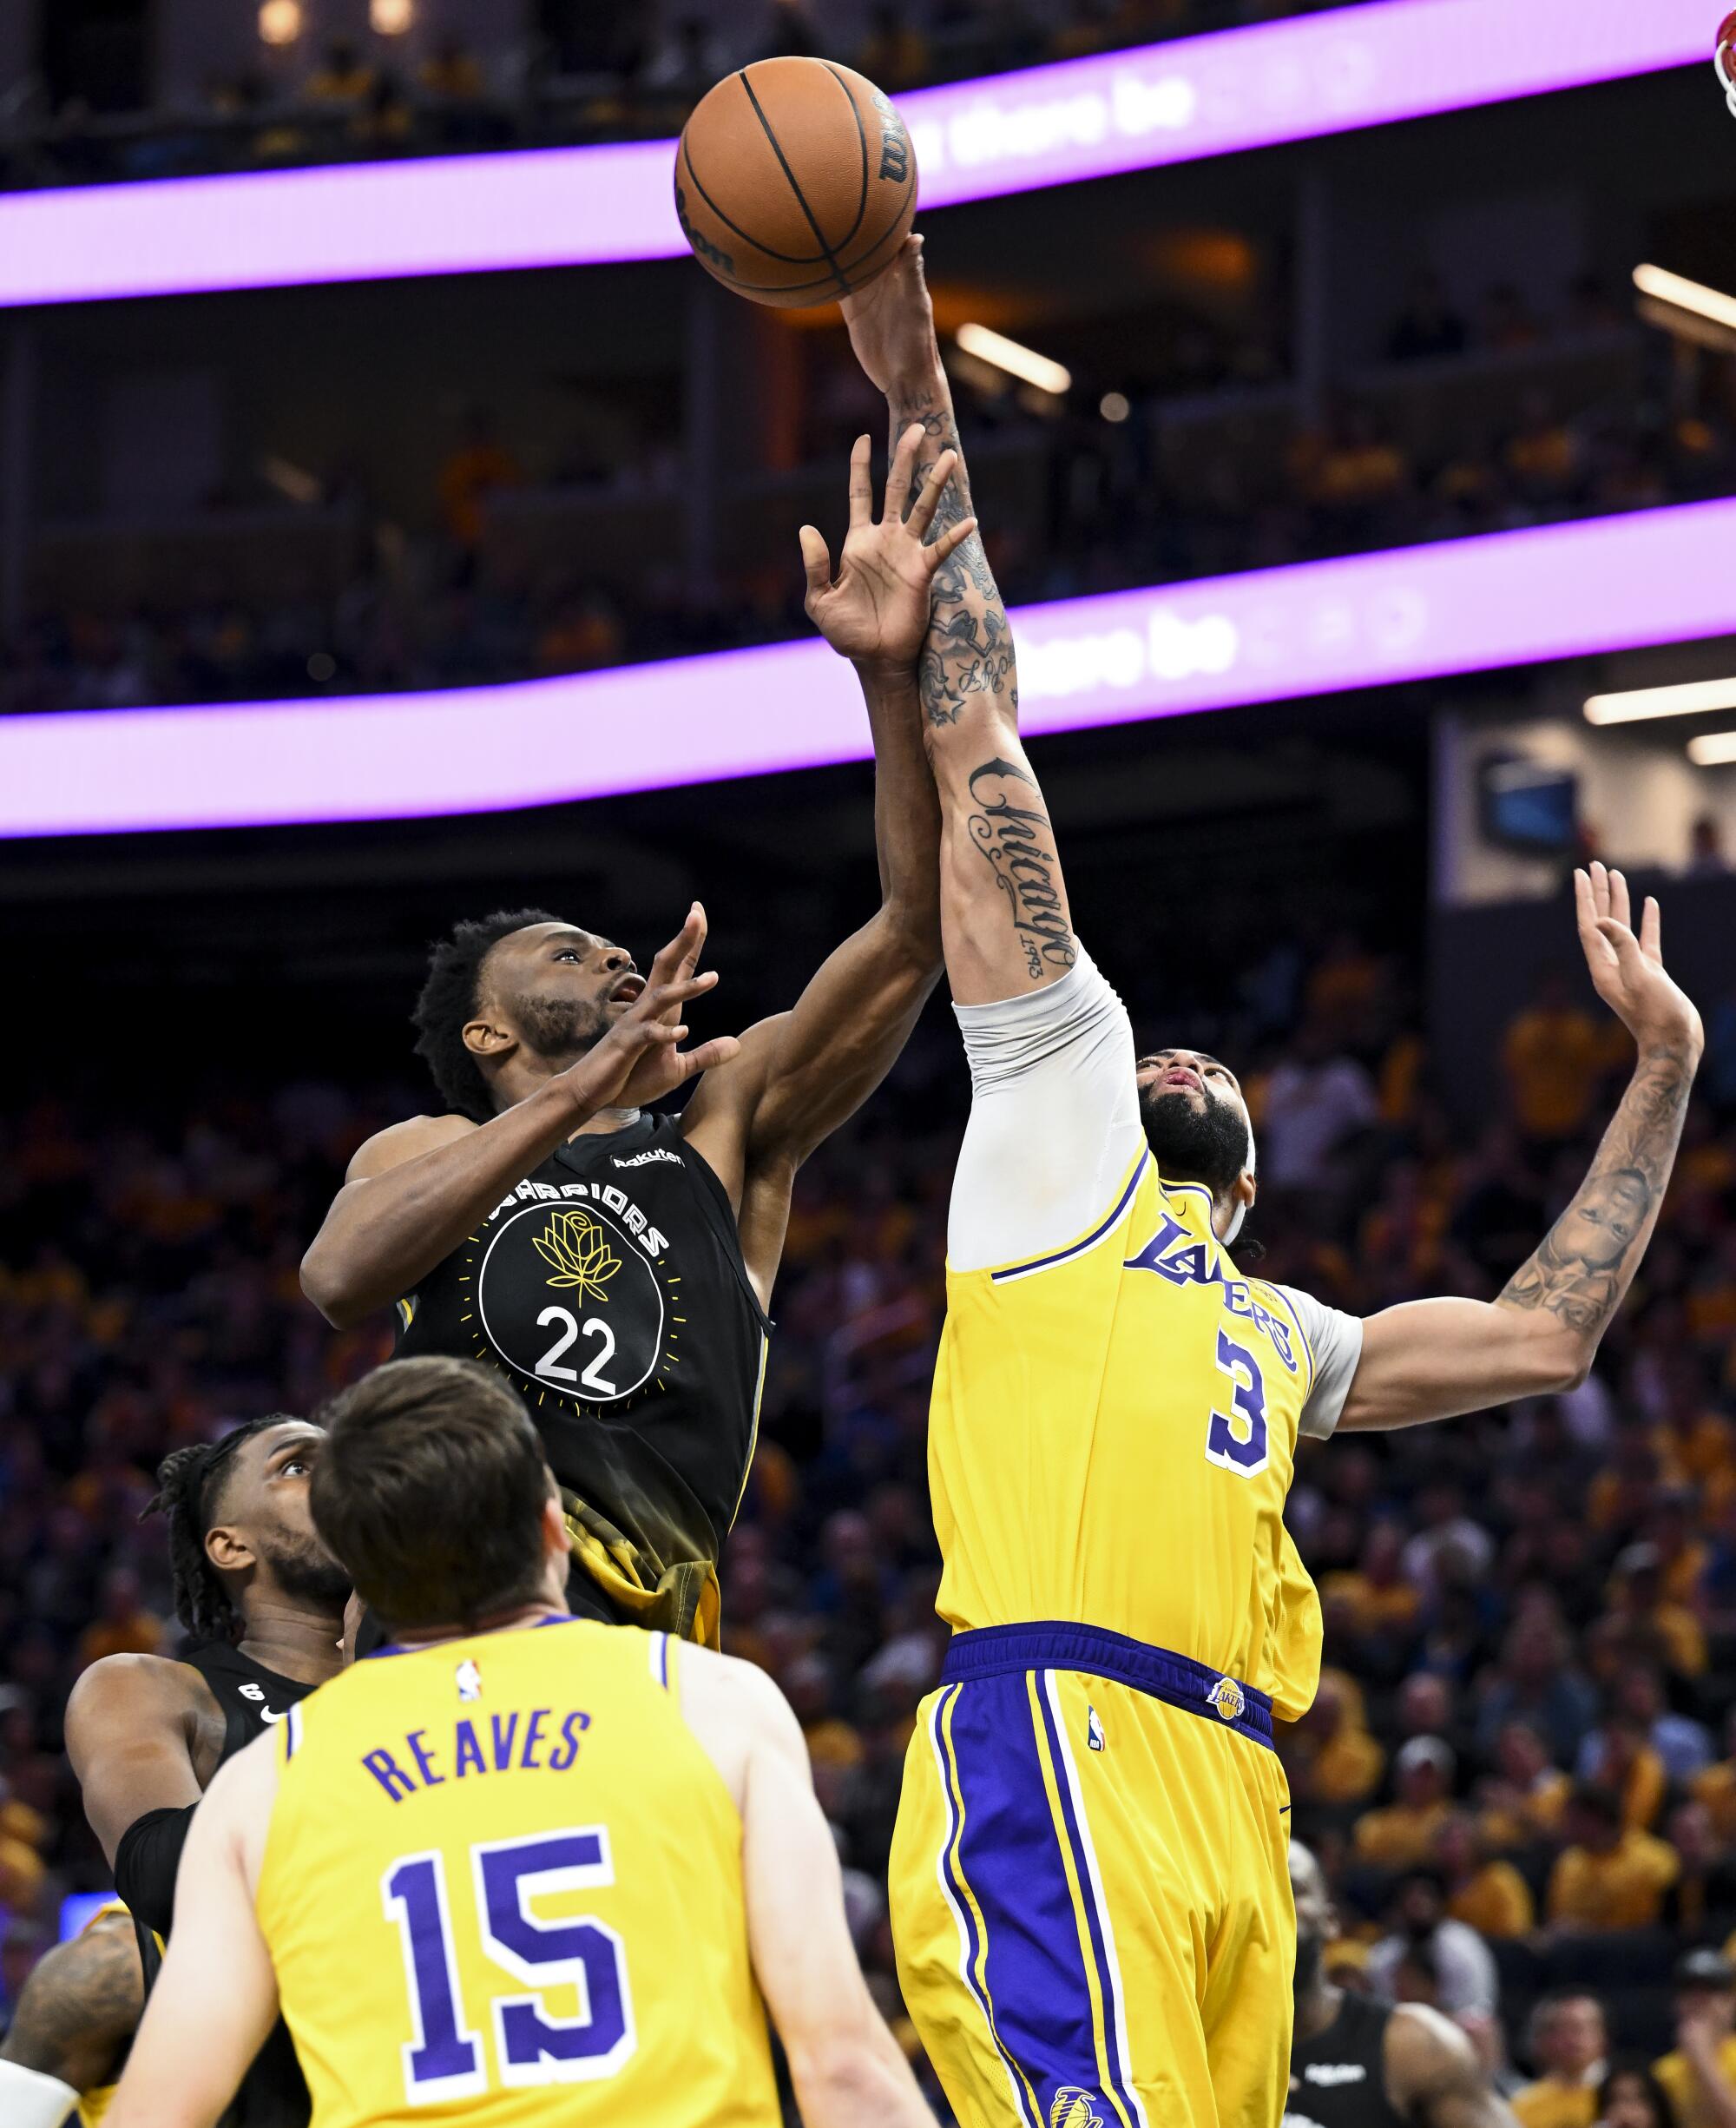 Lakers forward Anthony Davis, right, blocks a shot by Warriors forward Andrew Wiggins during the third quarter.